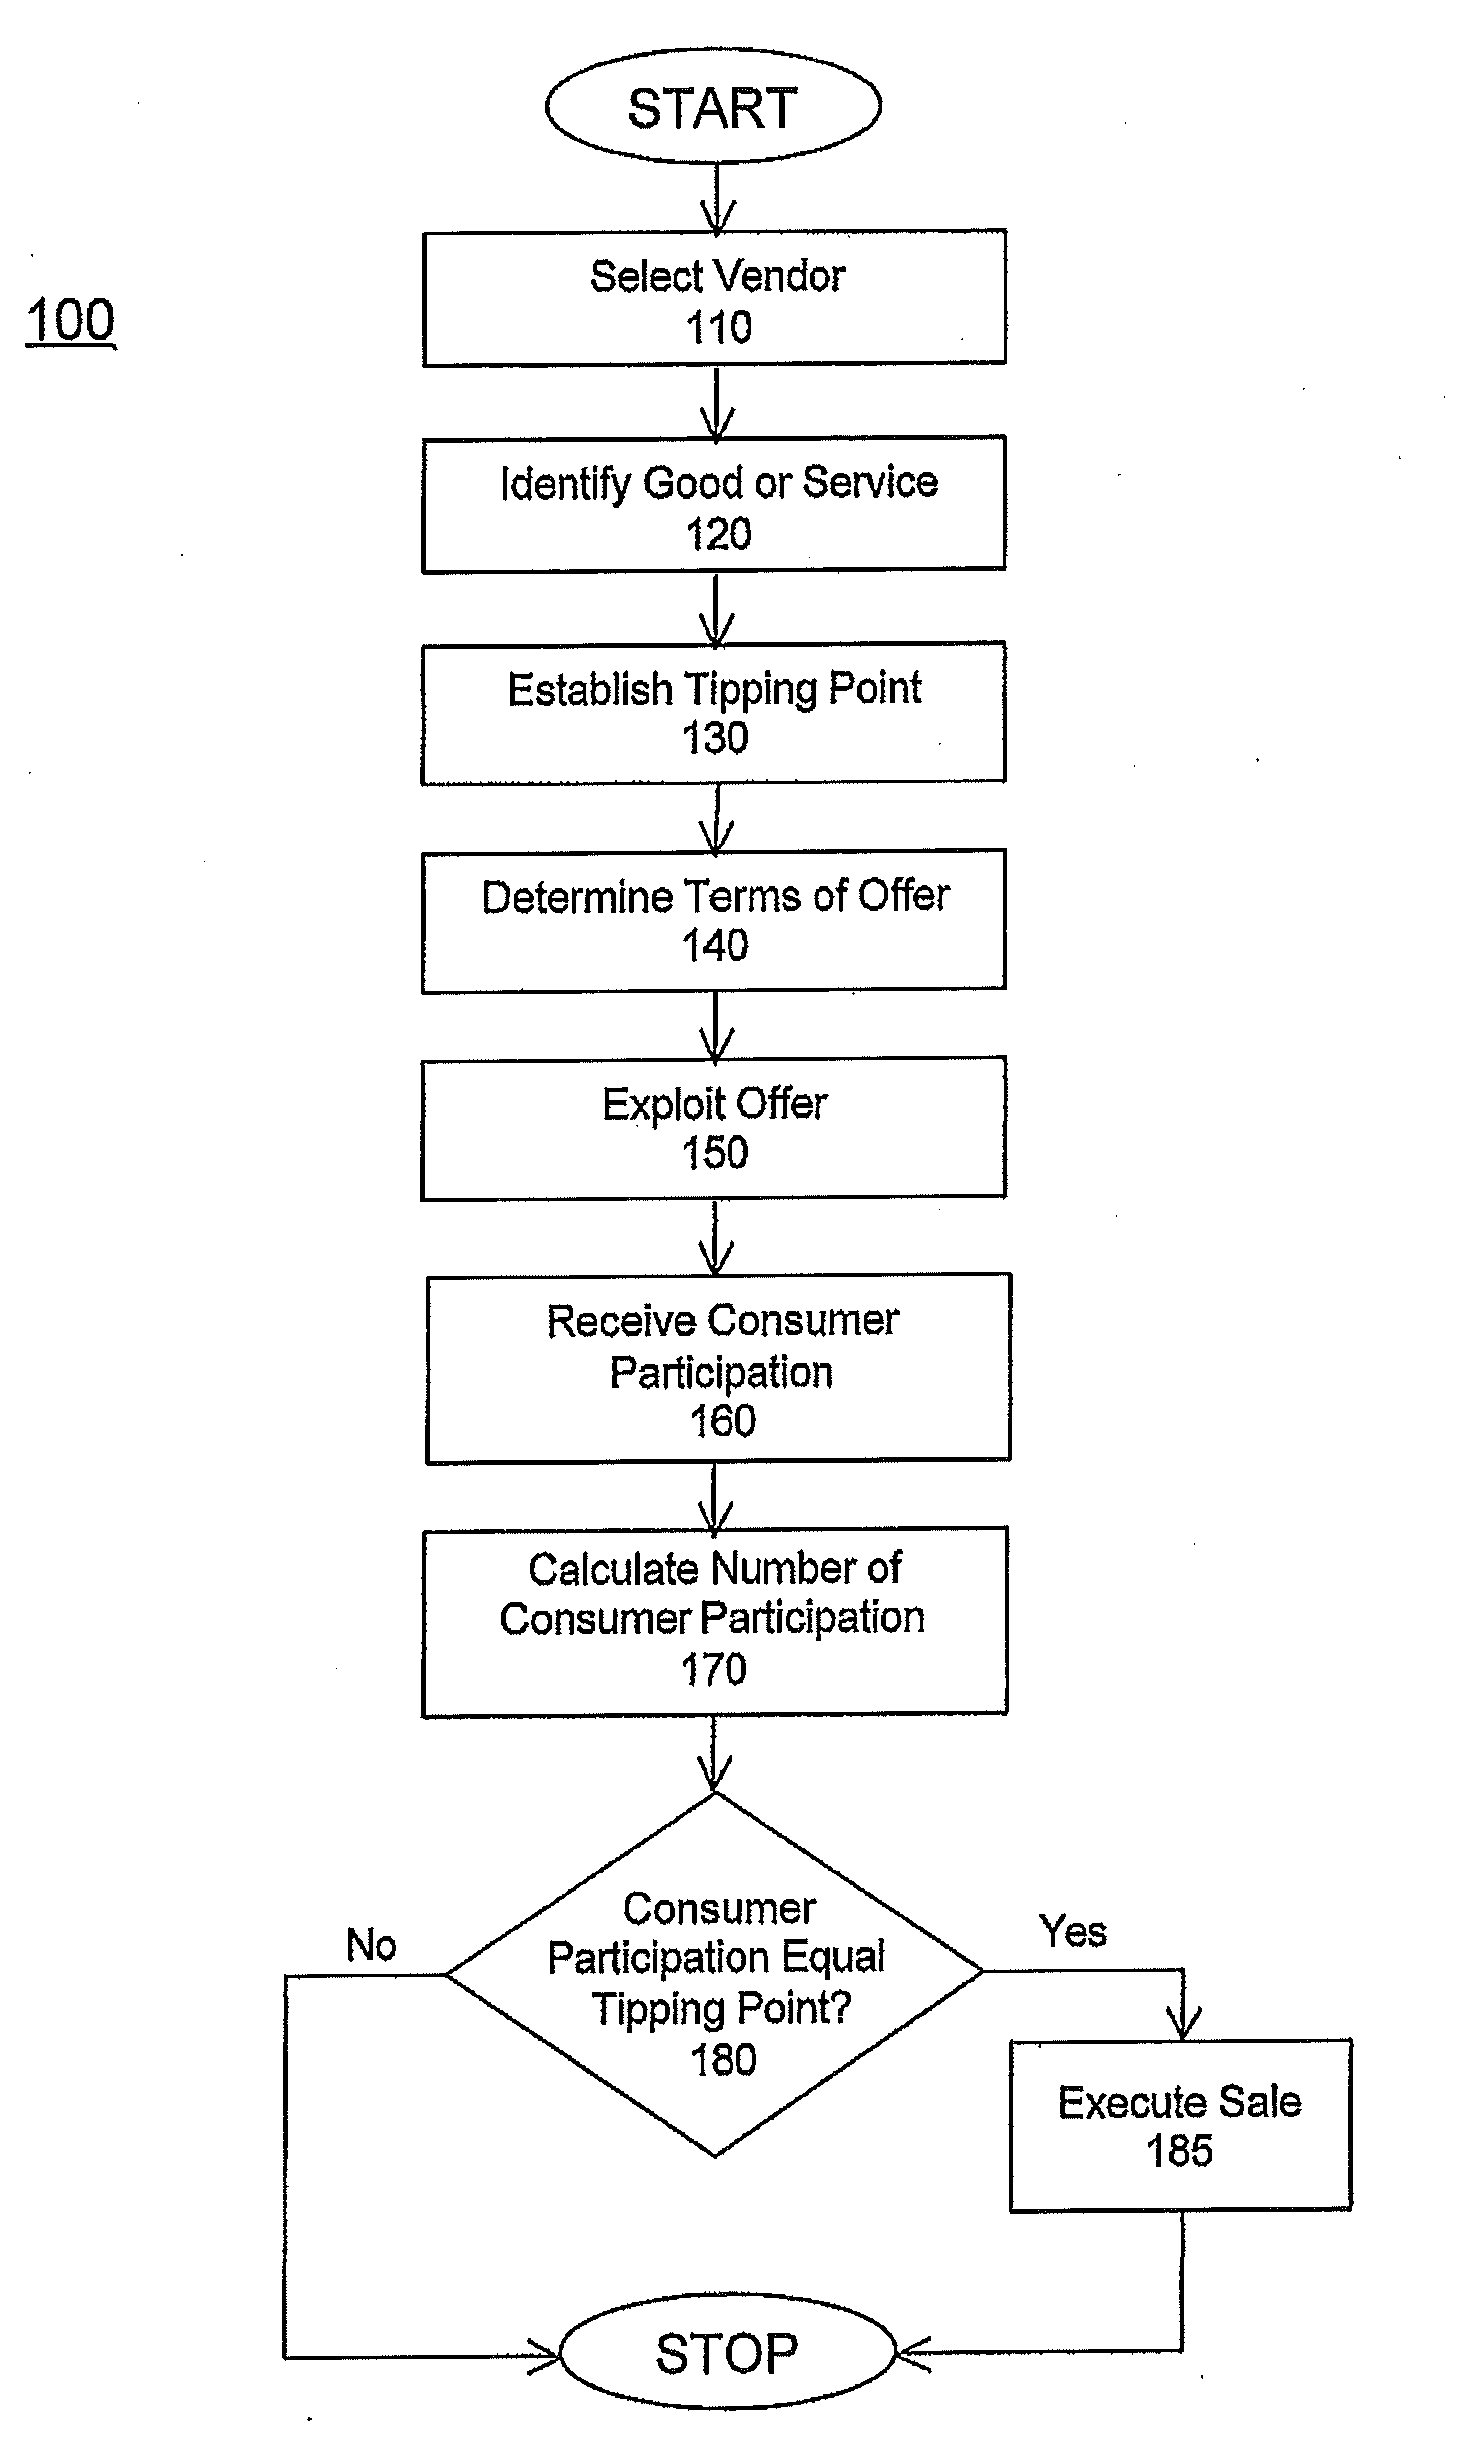 System and methods for discount retailing